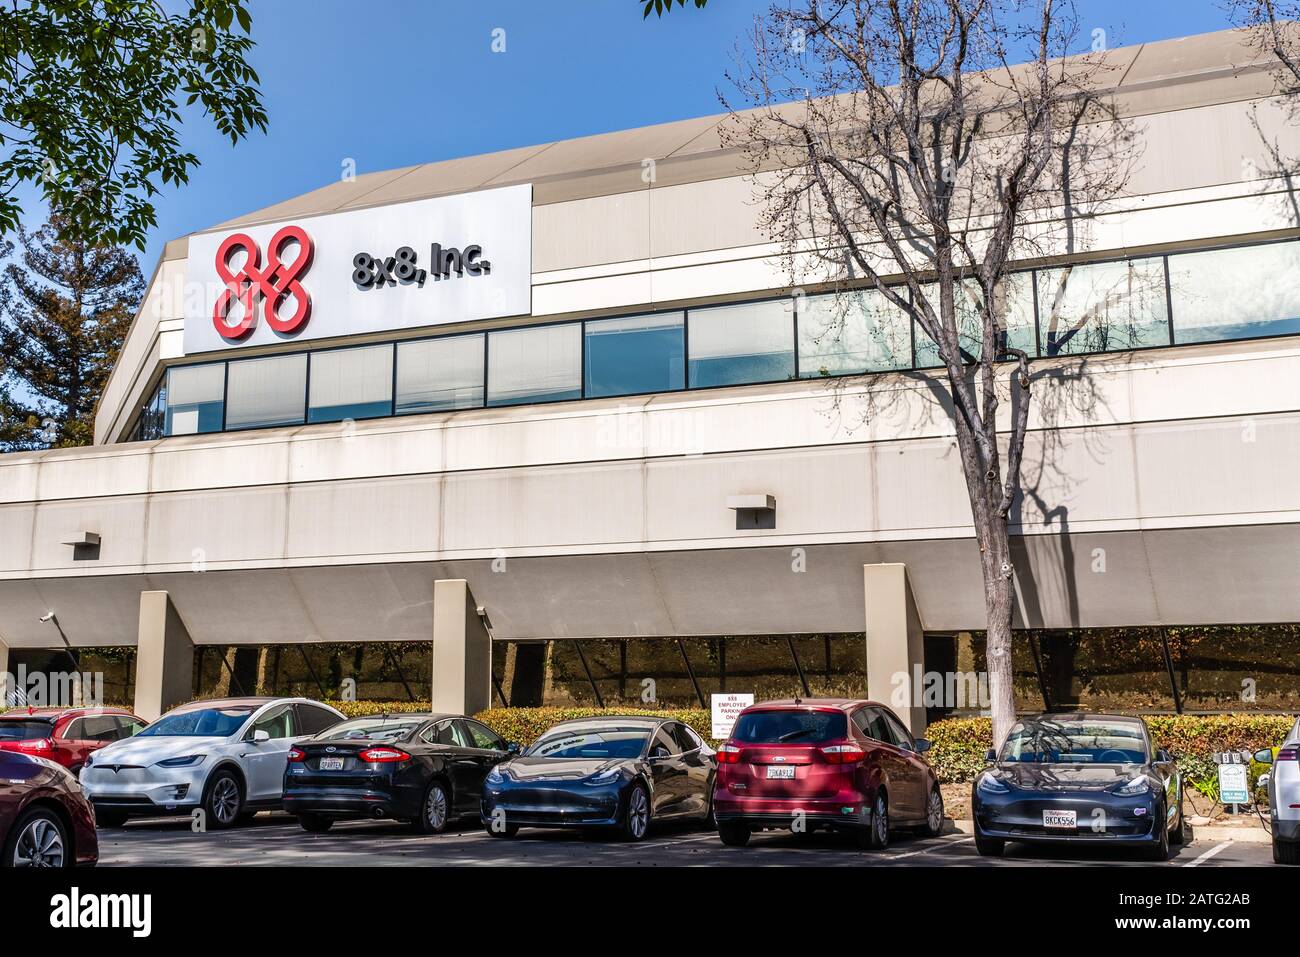 Jan 31, 2020 San Jose / CA / USA - 8X8 headquarters in Silicon Valley; 8x8 Inc. is a provider of Voice over IP products Stock Photo